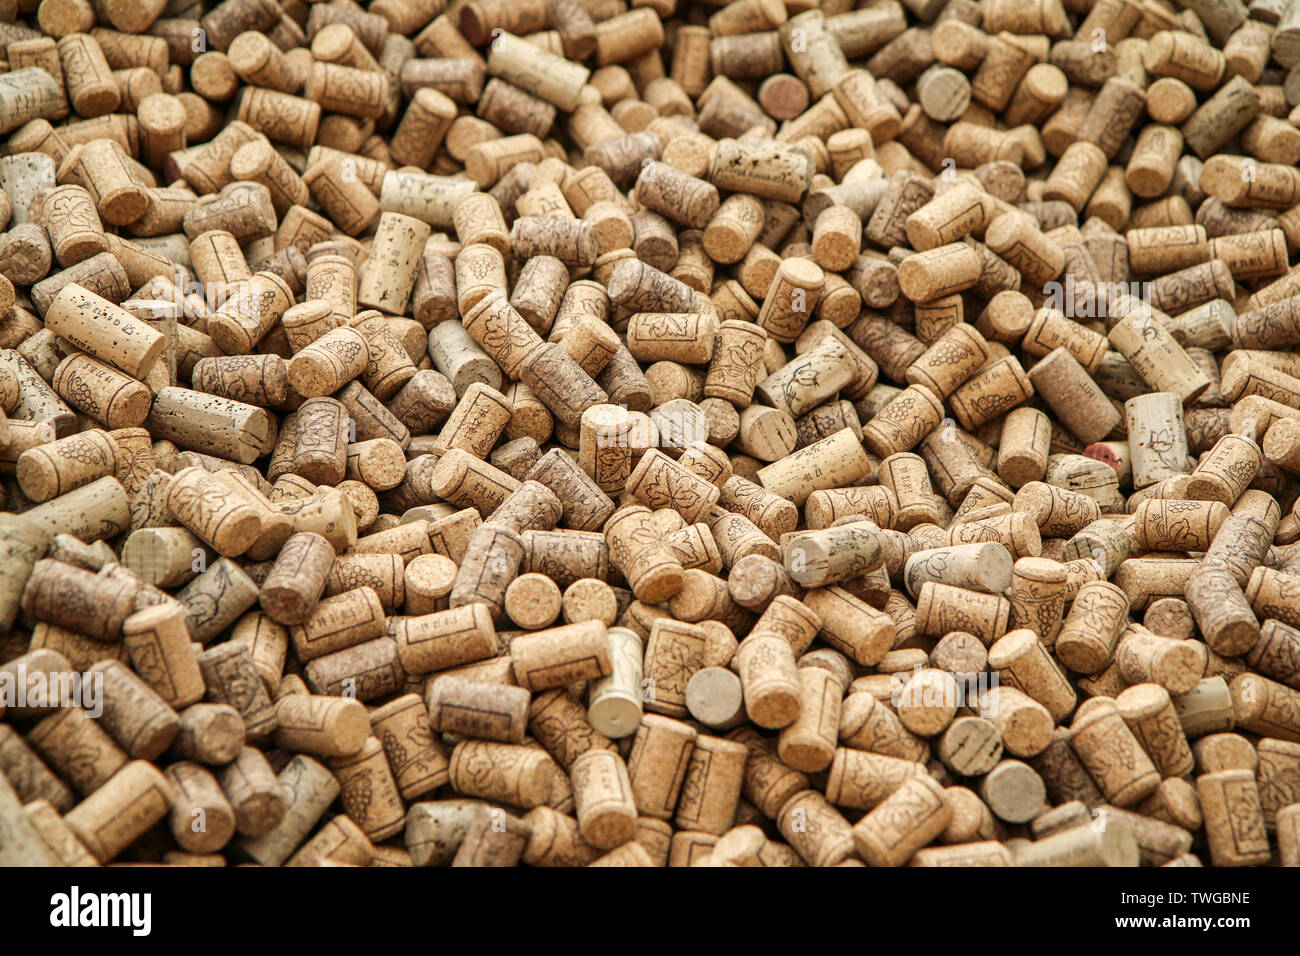 Many of cork plugs for the wine bottle in detail. Stock Photo